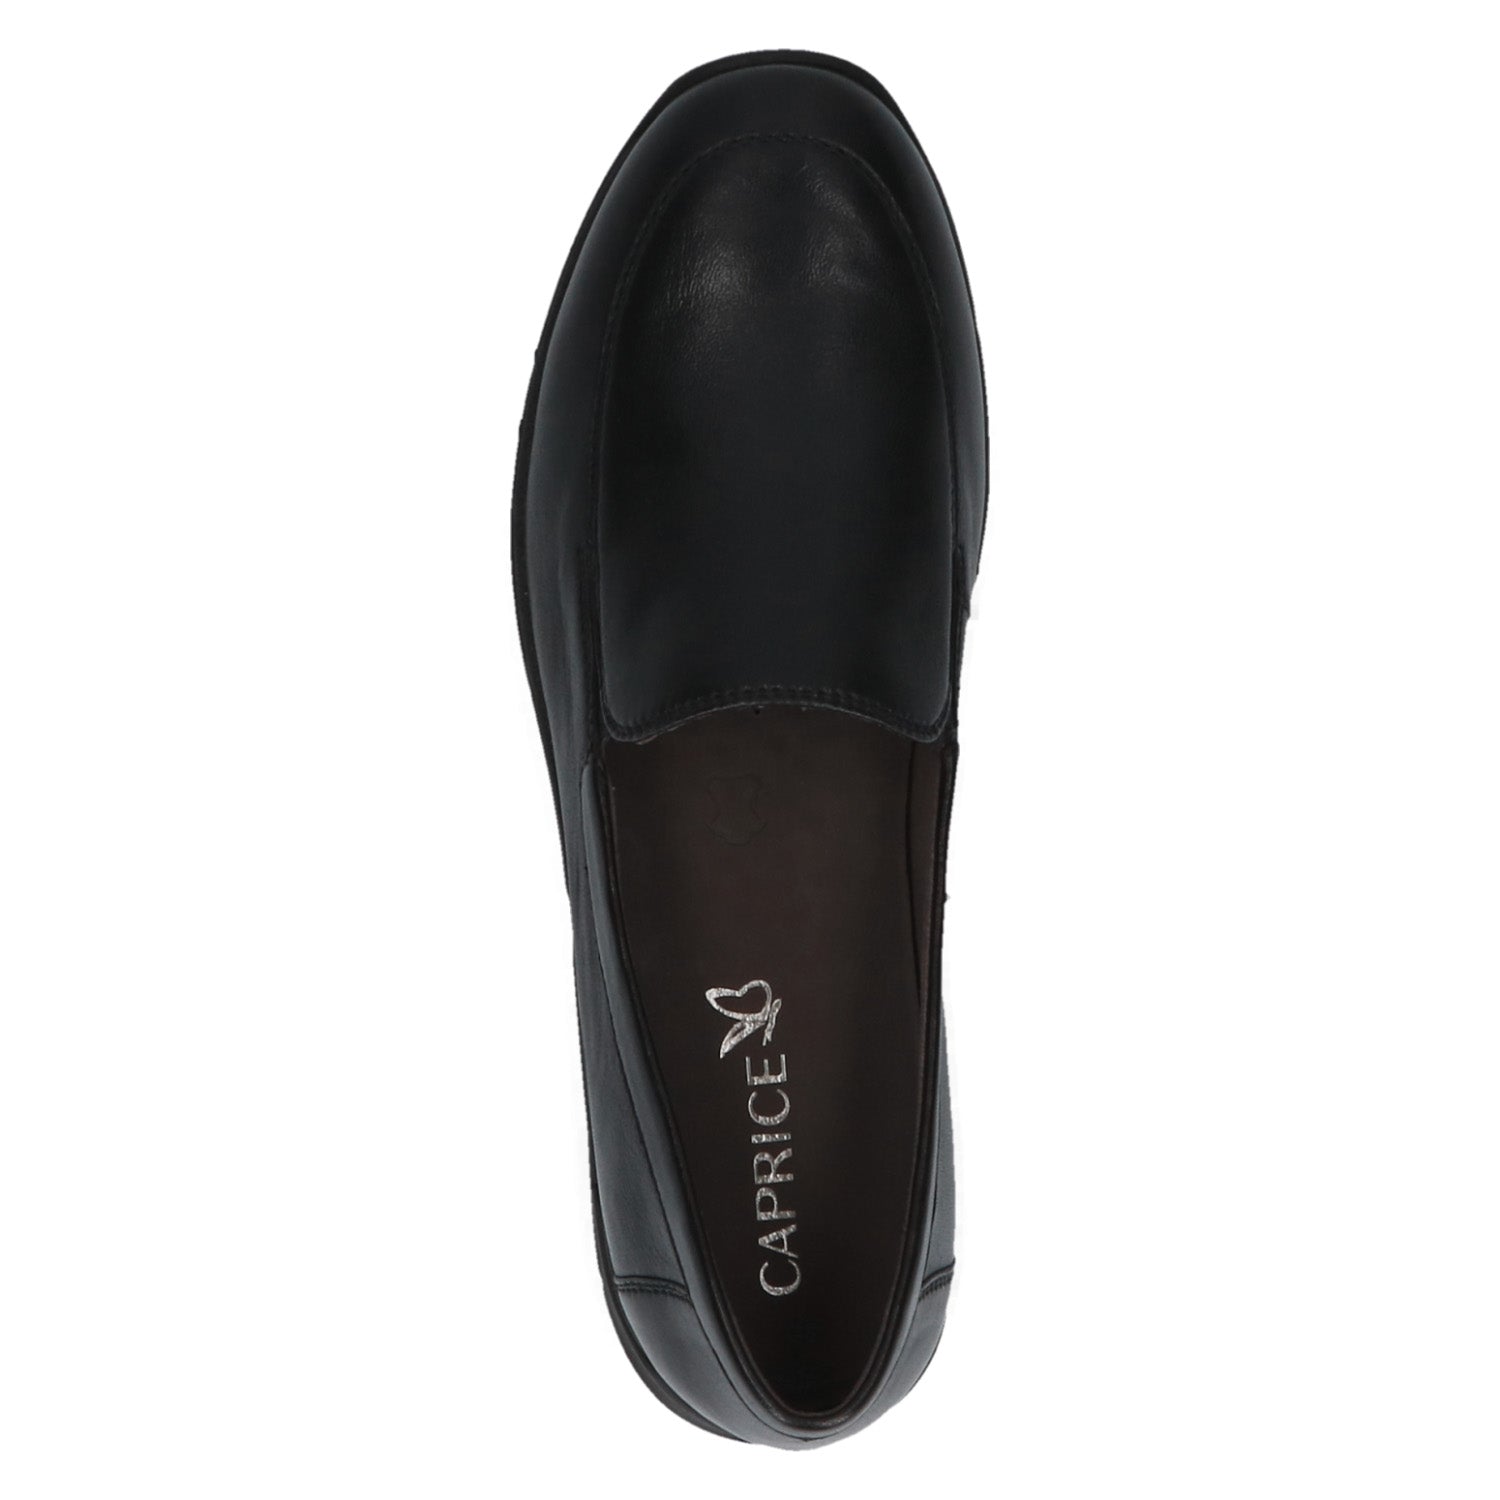 Front view of Caprice Black Slip-On Shoe.